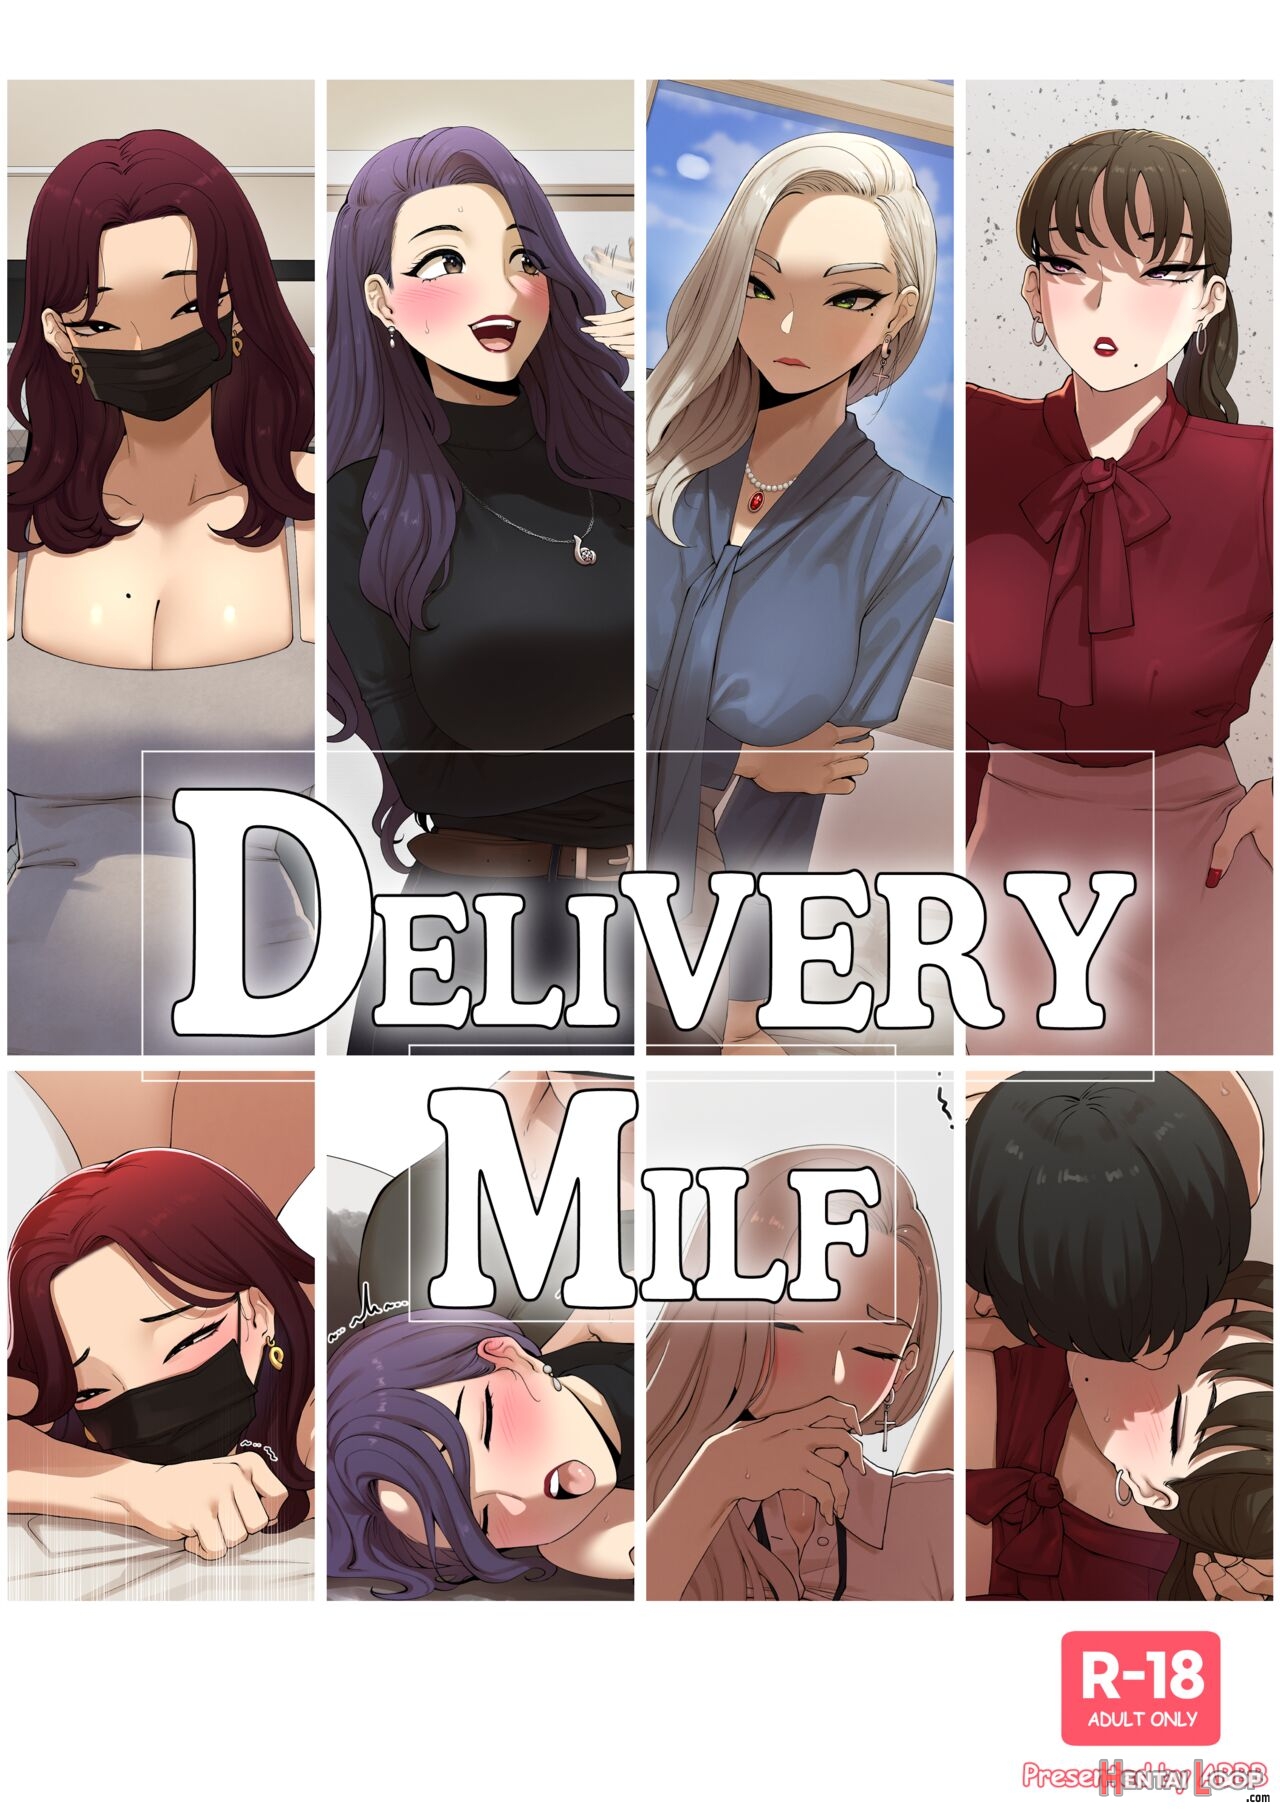 Delivery Milf page 1